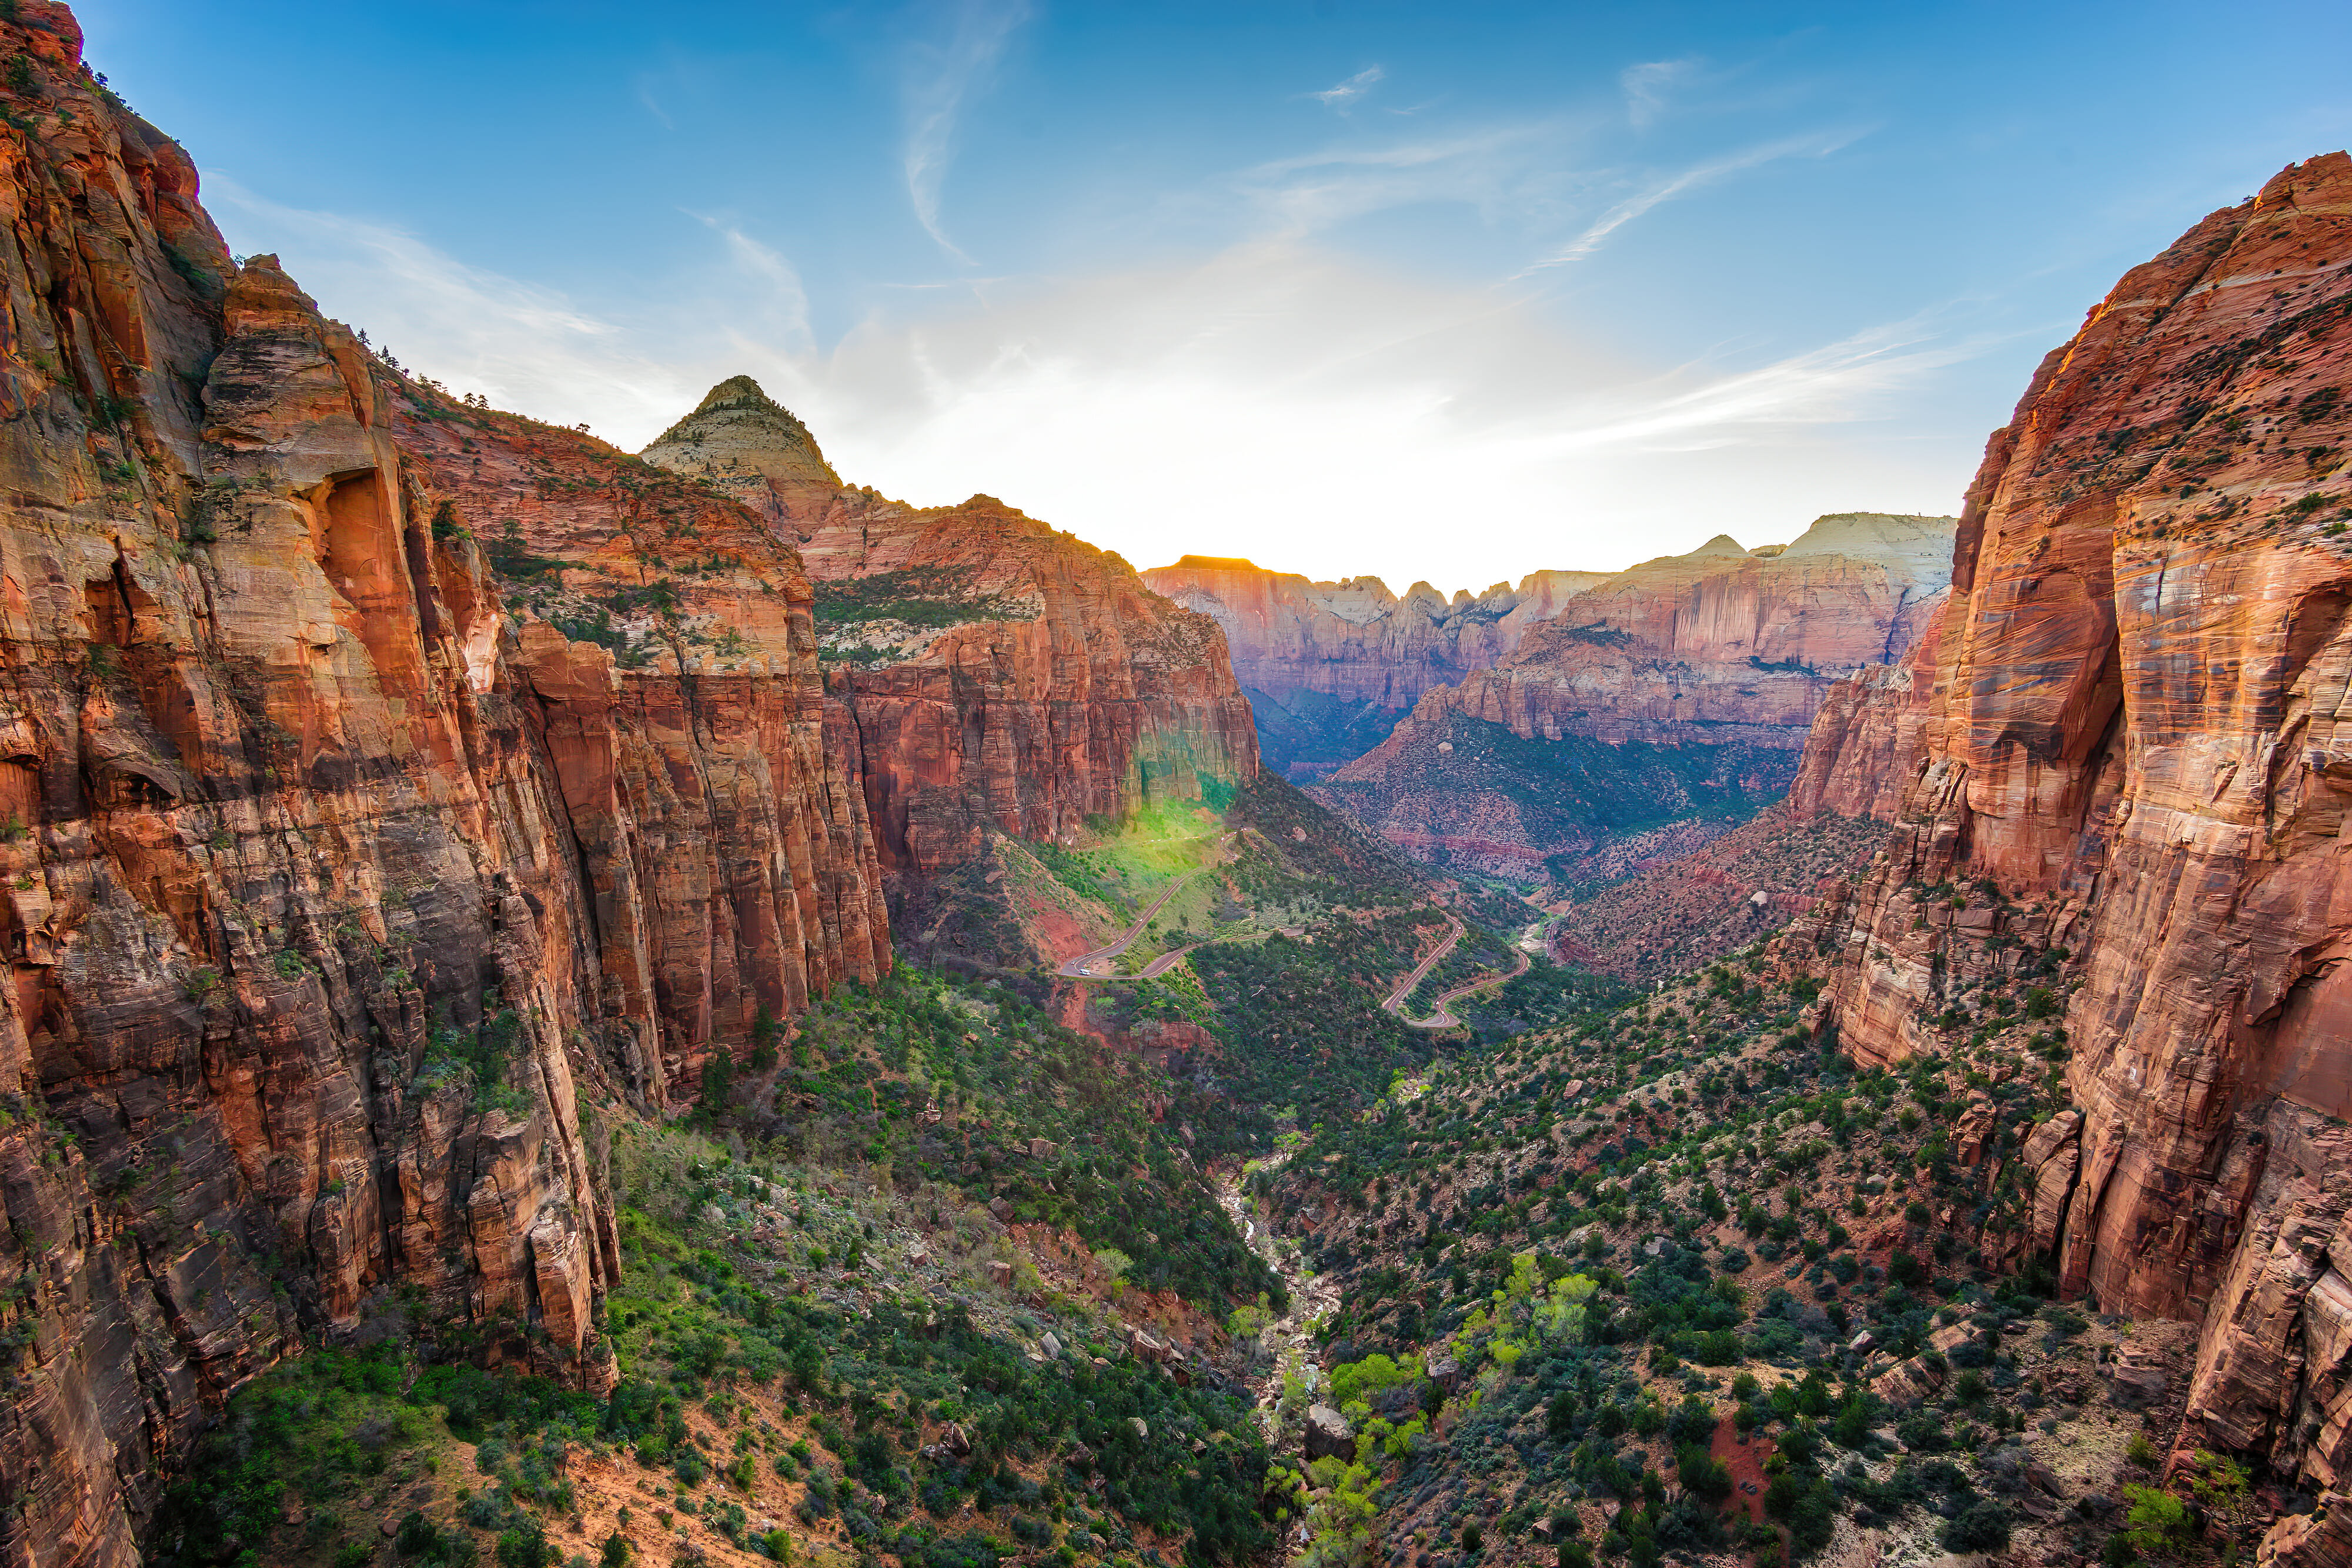 Canyon Overlook at Sunset in Zion National Park, Utah, USA